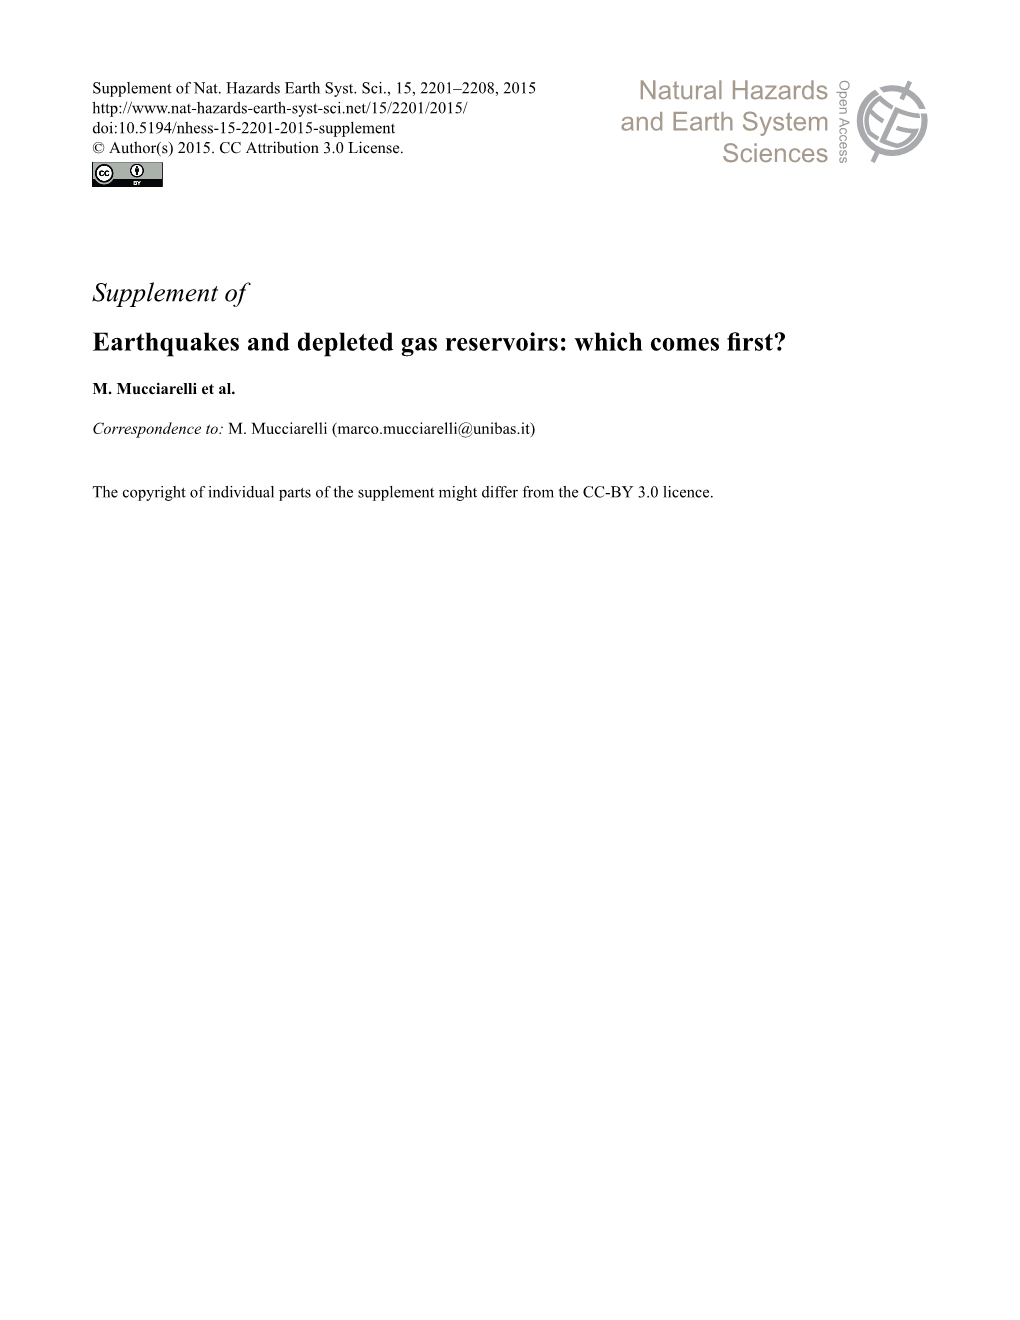 Supplement of Earthquakes and Depleted Gas Reservoirs: Which Comes First?